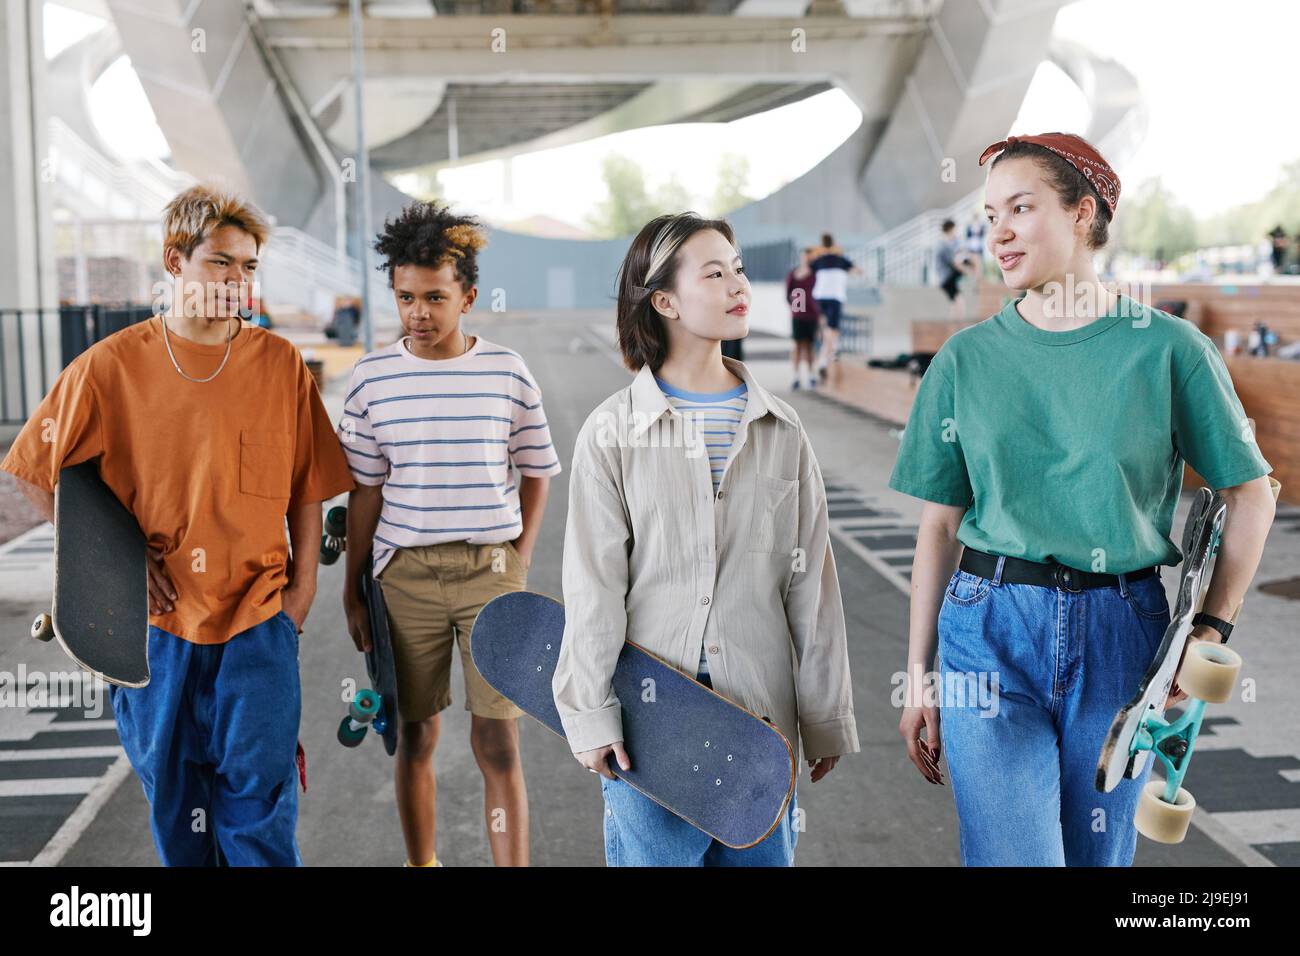 Diverse group of teenagers in skatepark outdoors at urban area wearing sporty outfits, copy space Stock Photo